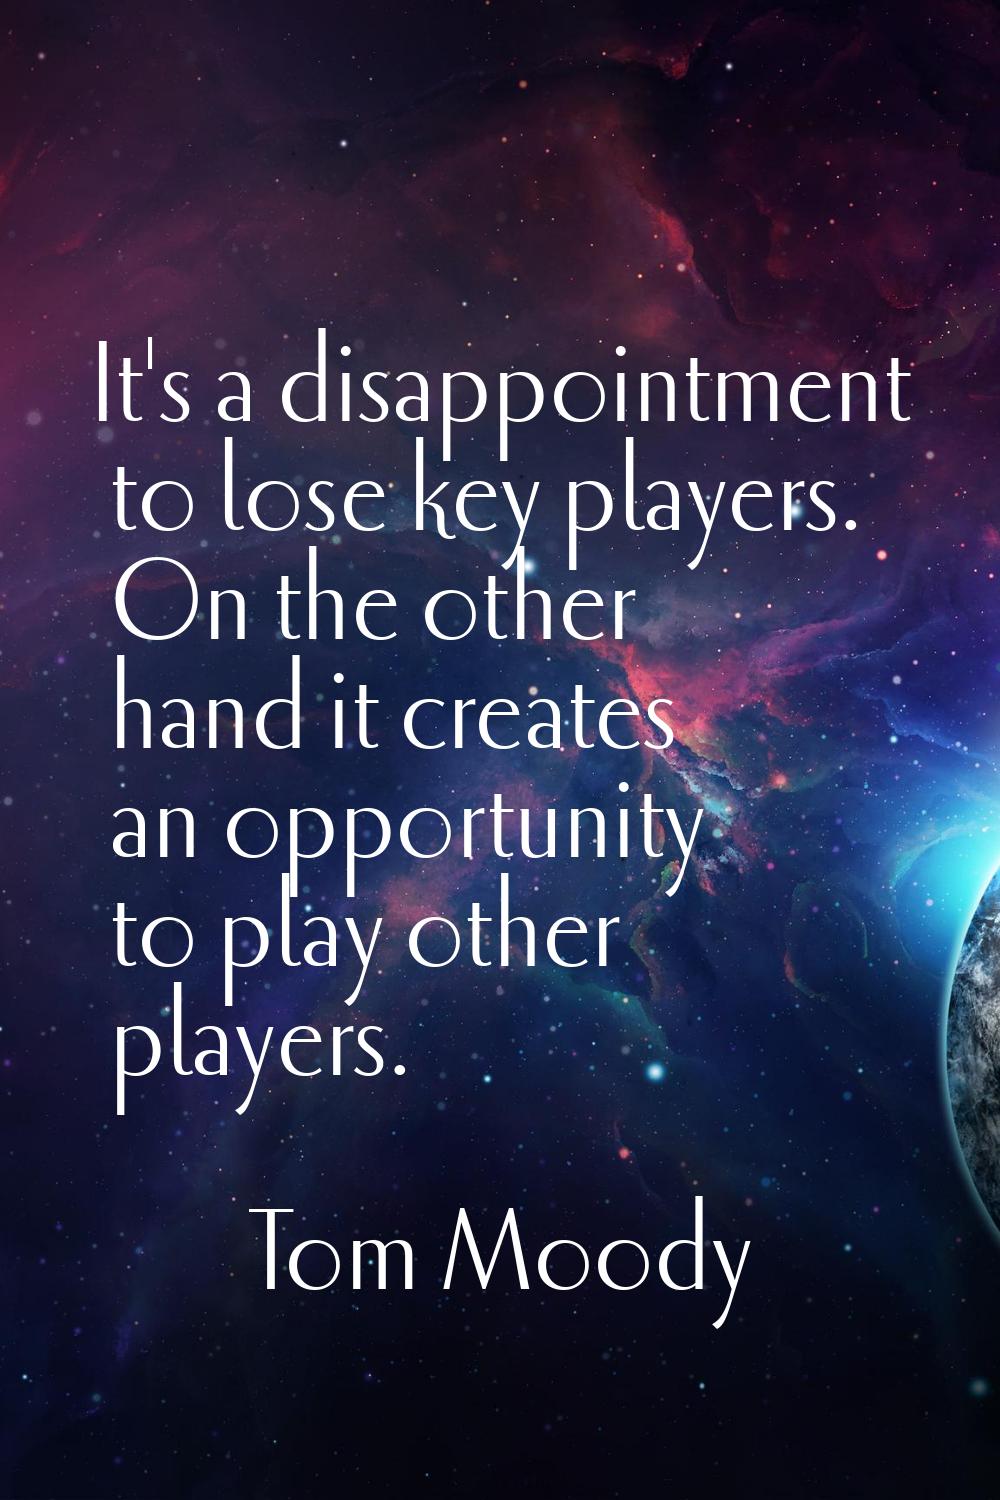 It's a disappointment to lose key players. On the other hand it creates an opportunity to play othe